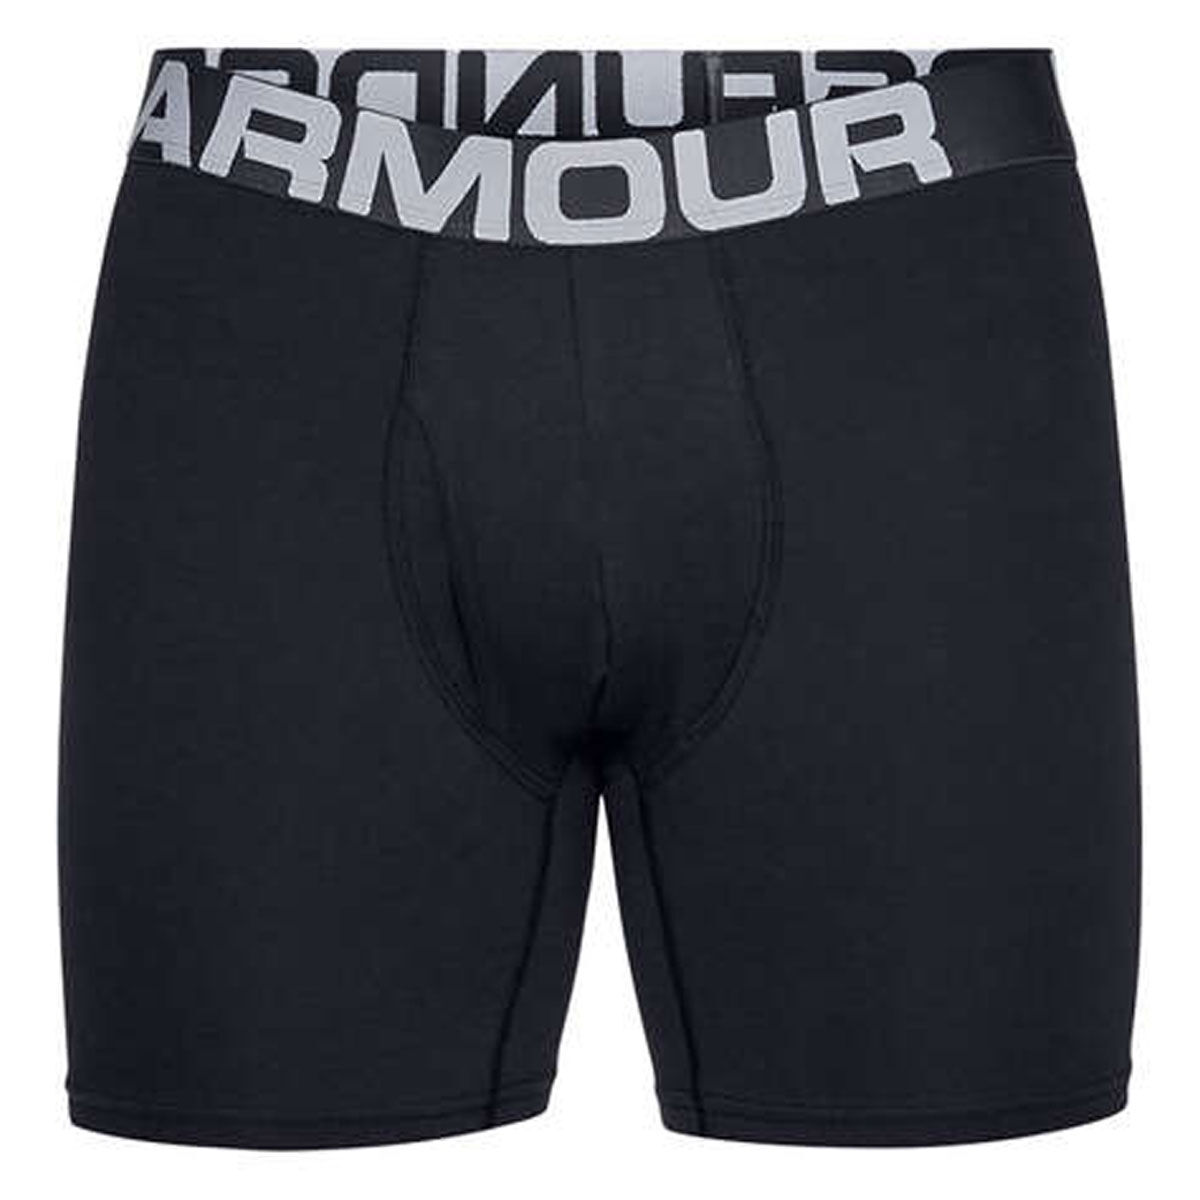 Under Armour Mens Charged Cotton 6-inch 3 Pack